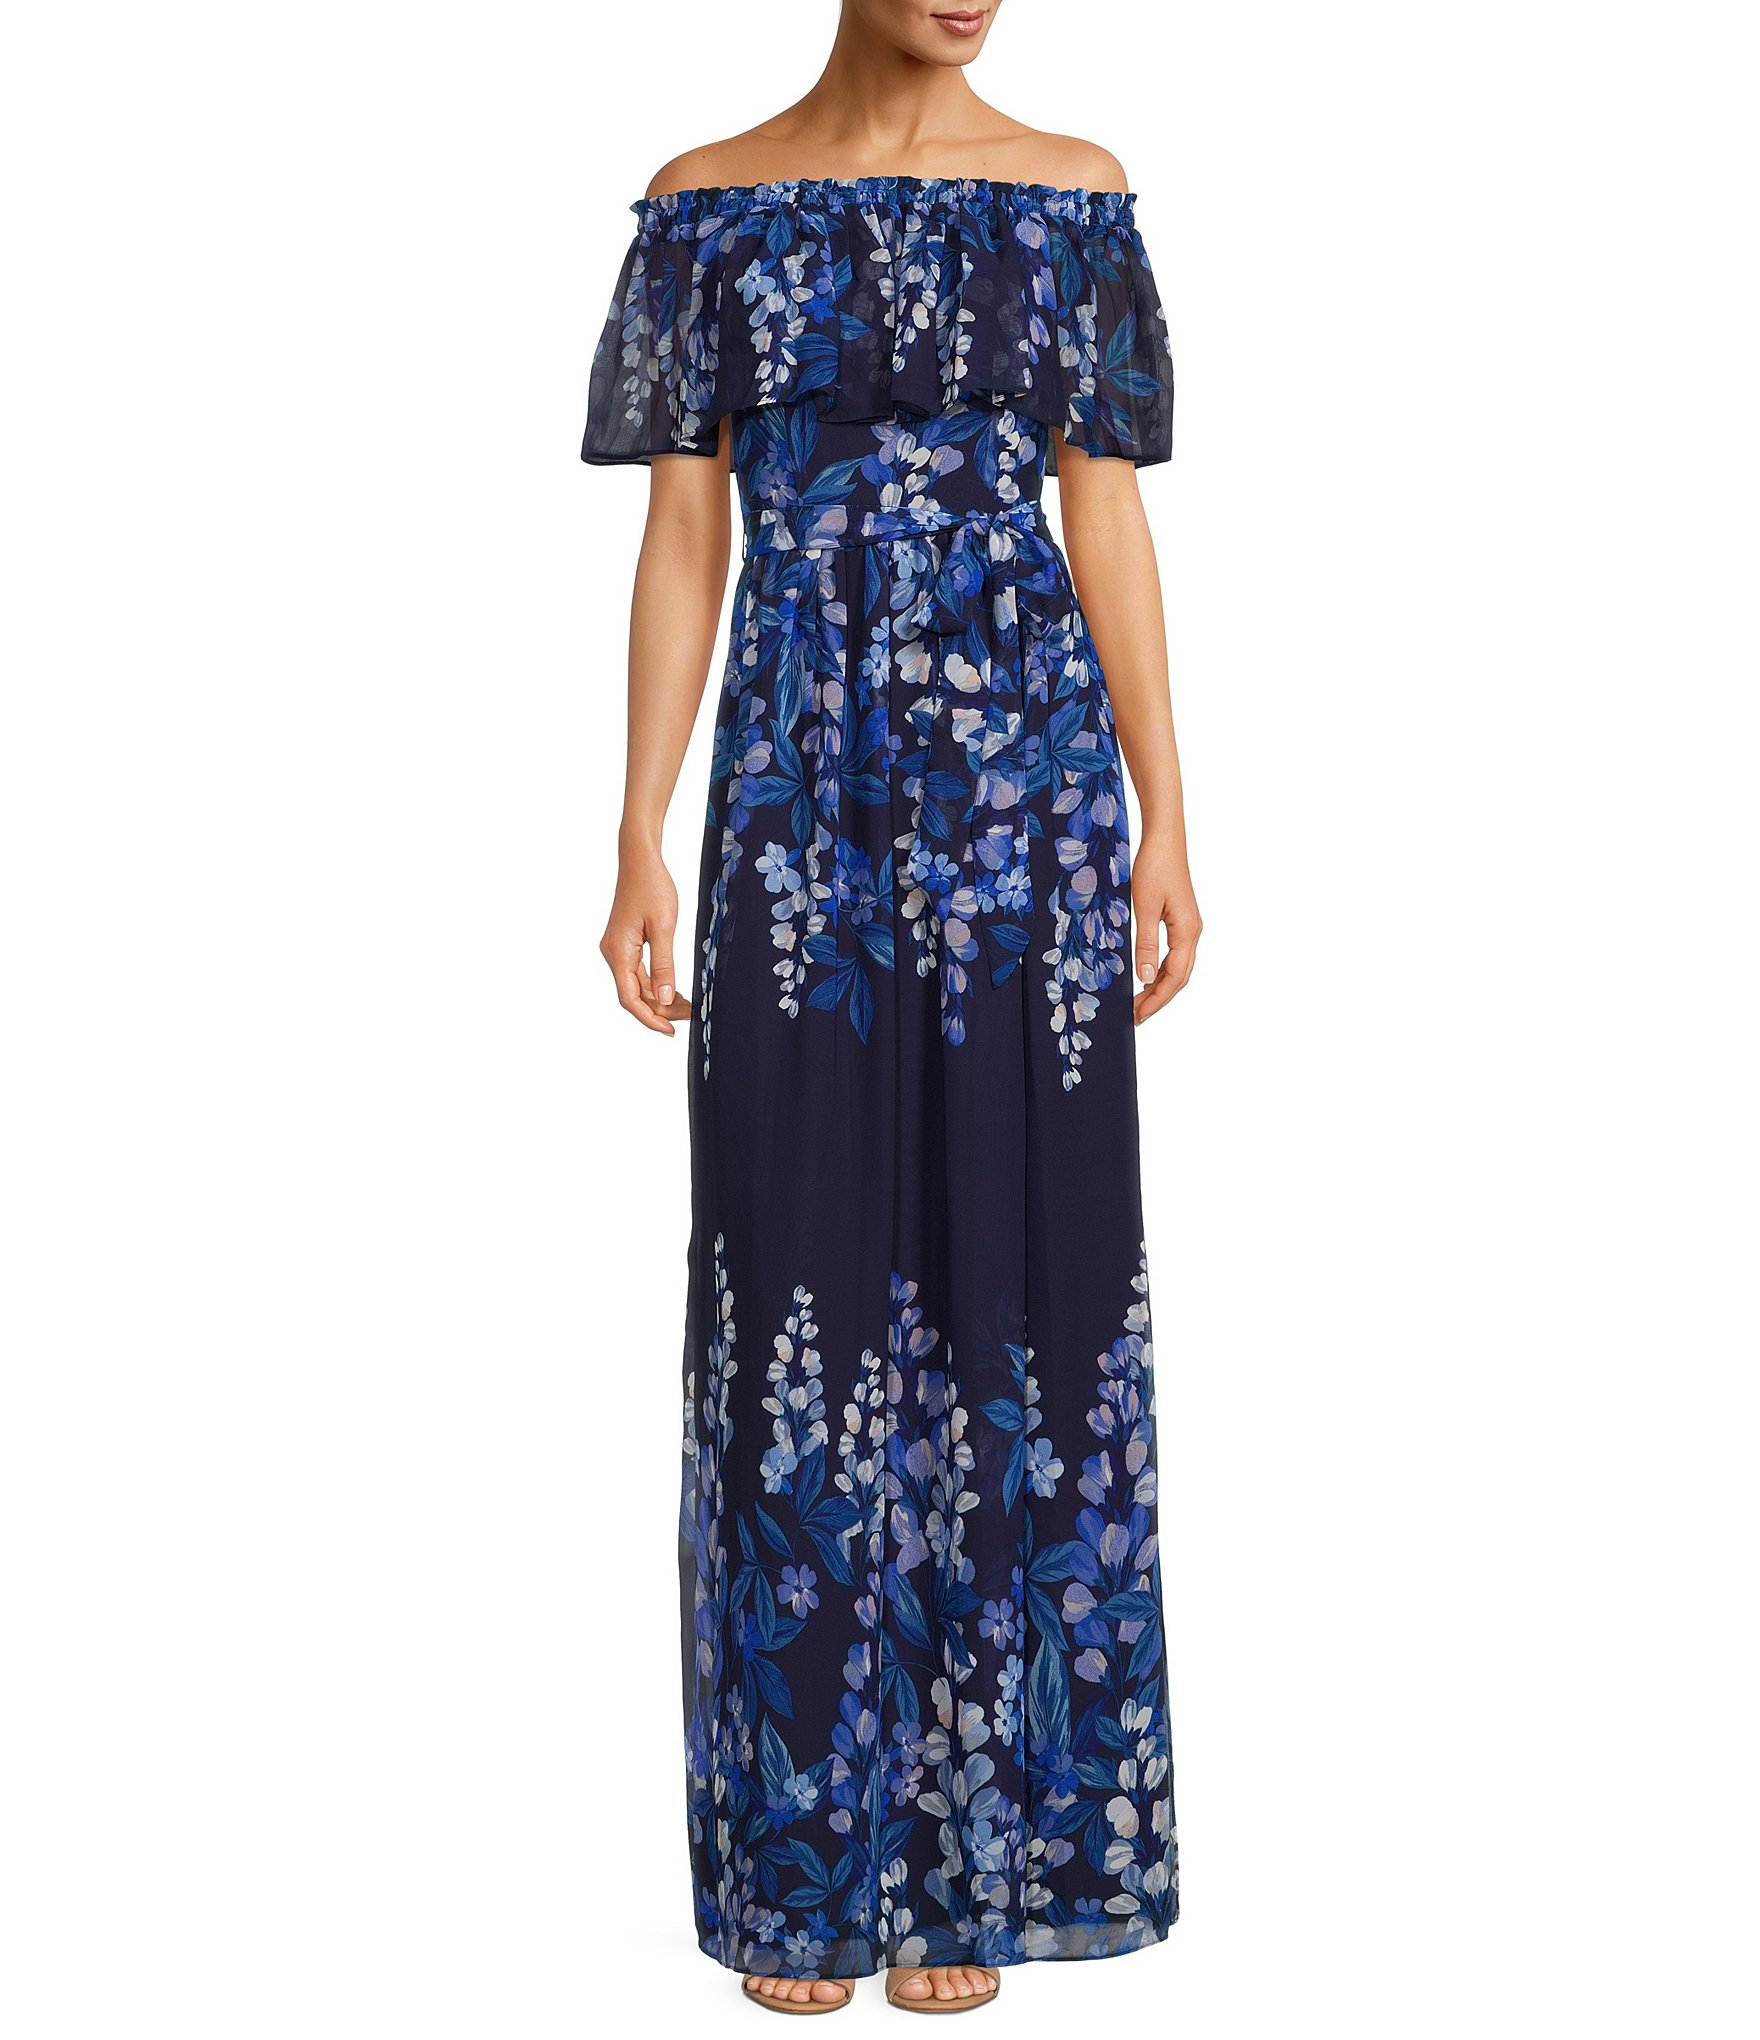 Floral Women's Maxi Dresses and Full-Length Dresses